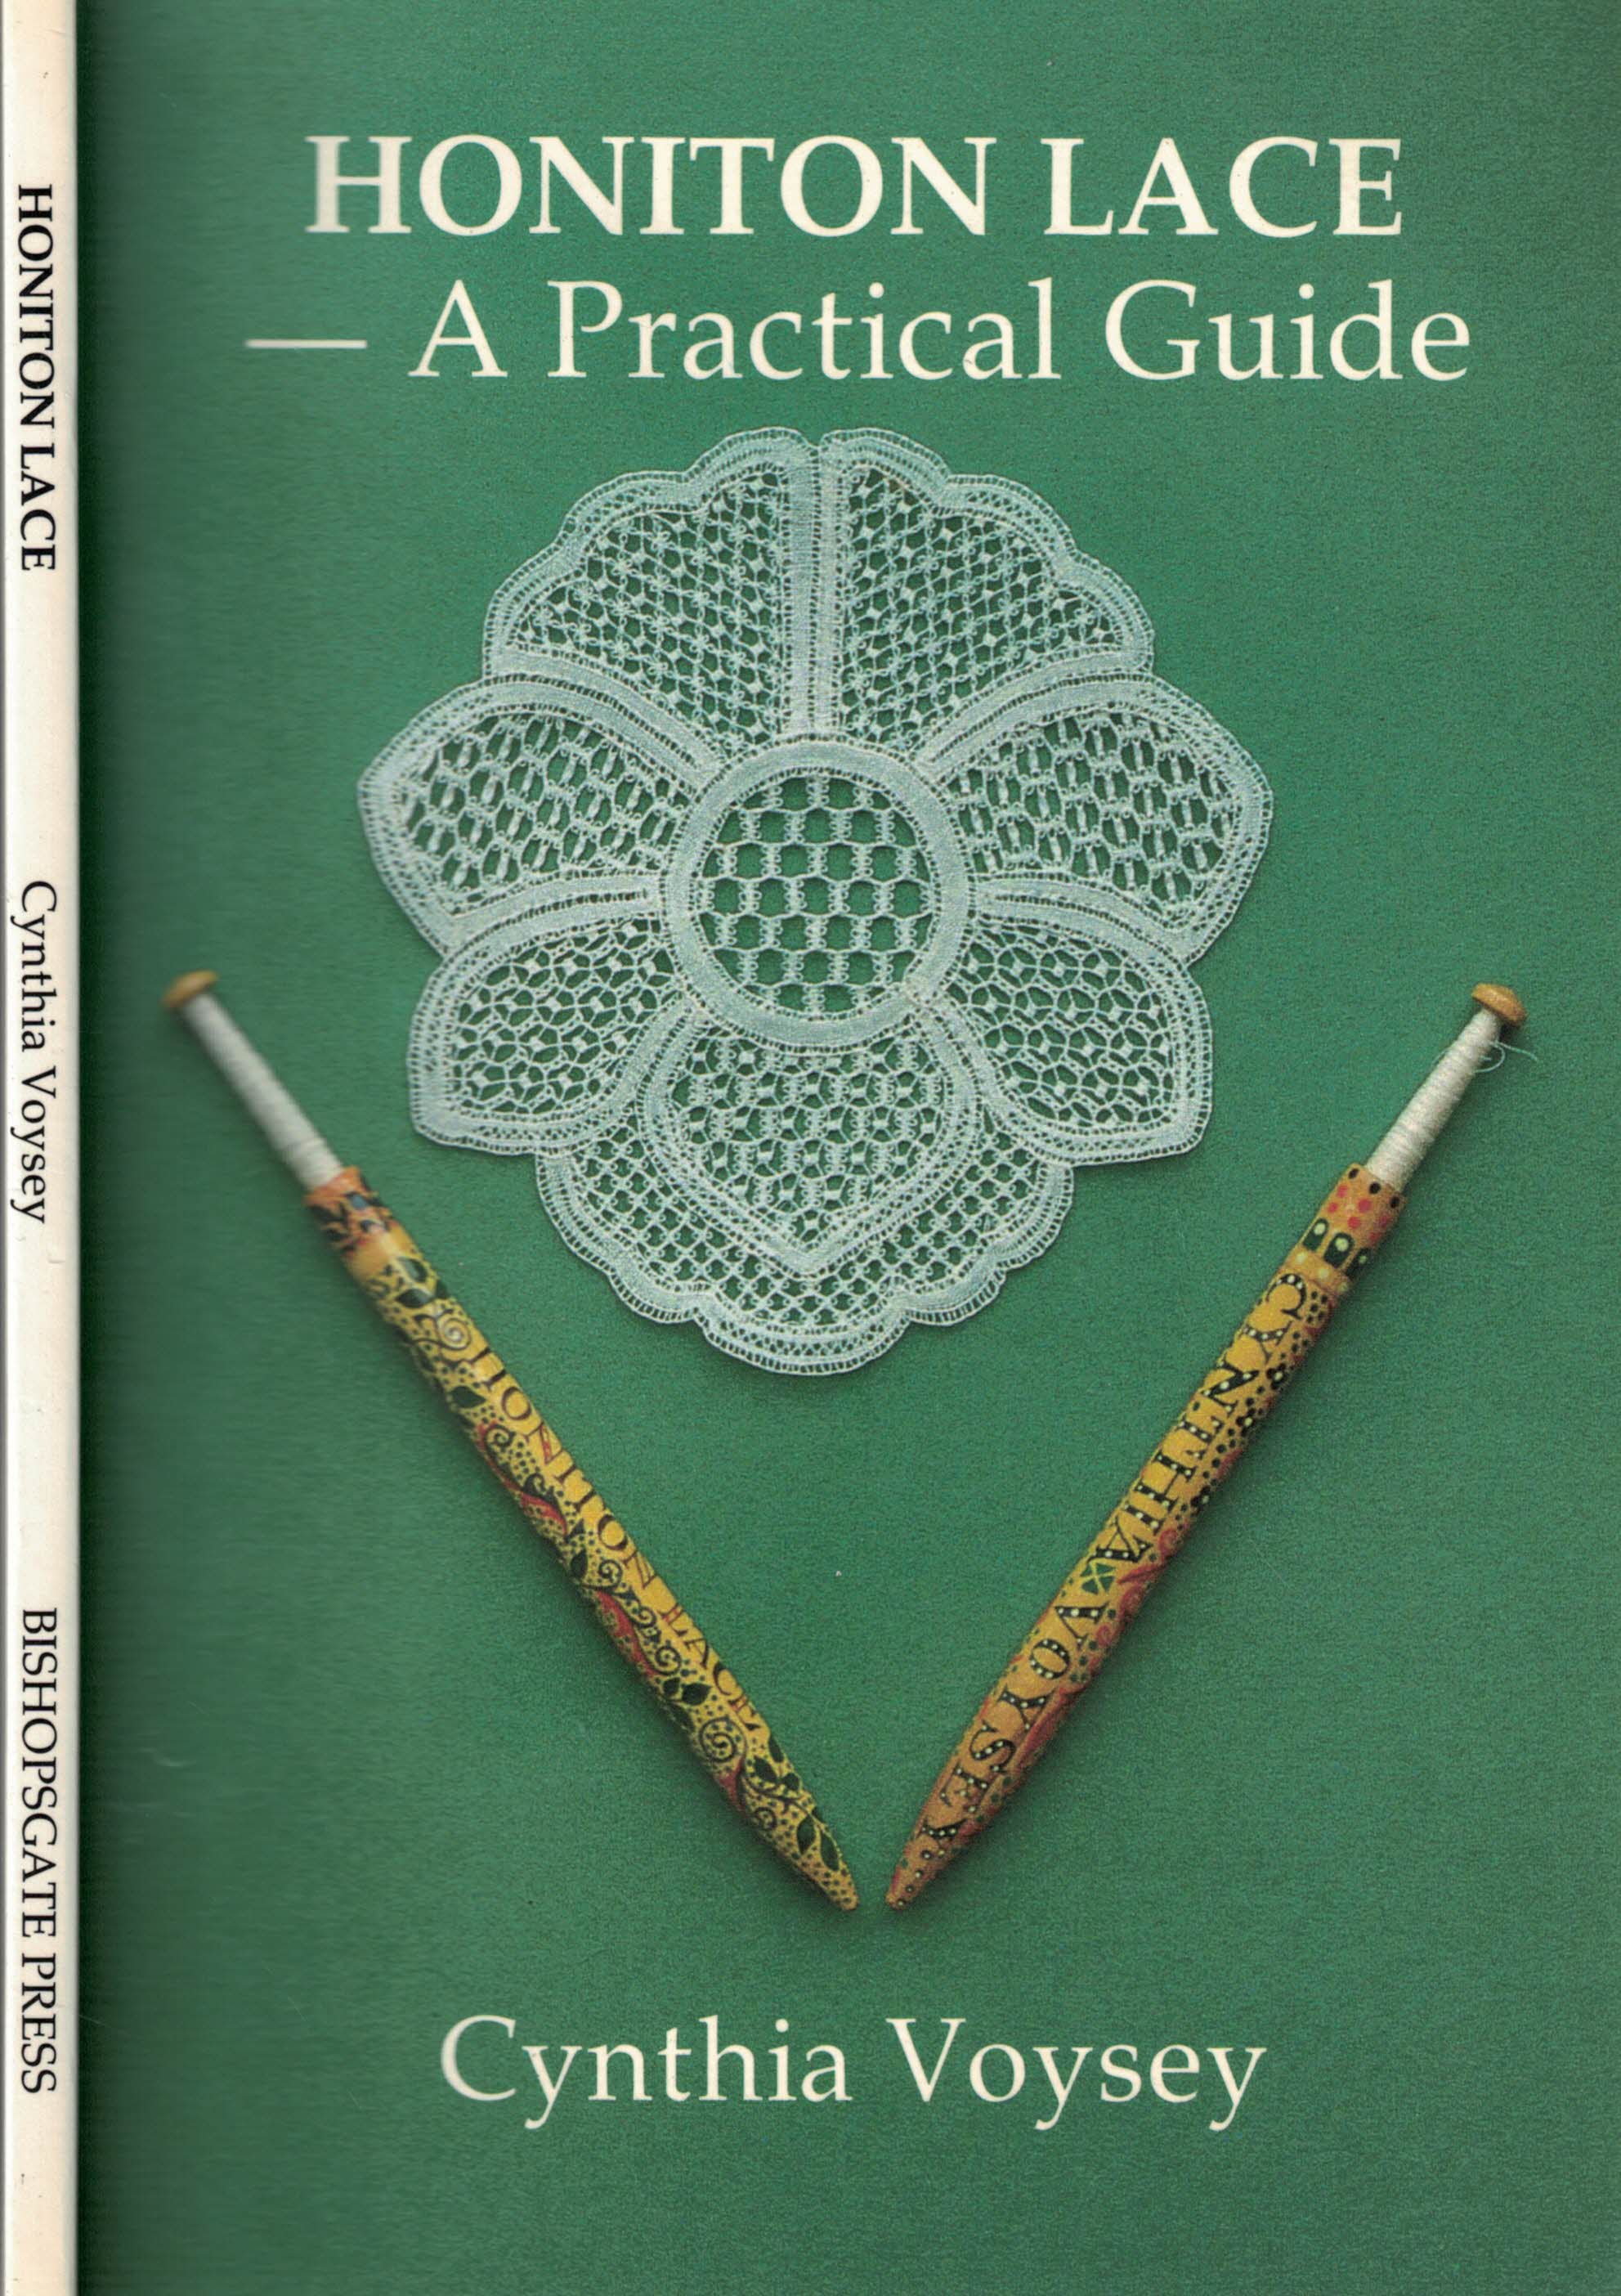 Honiton Lace - A Practical Guide